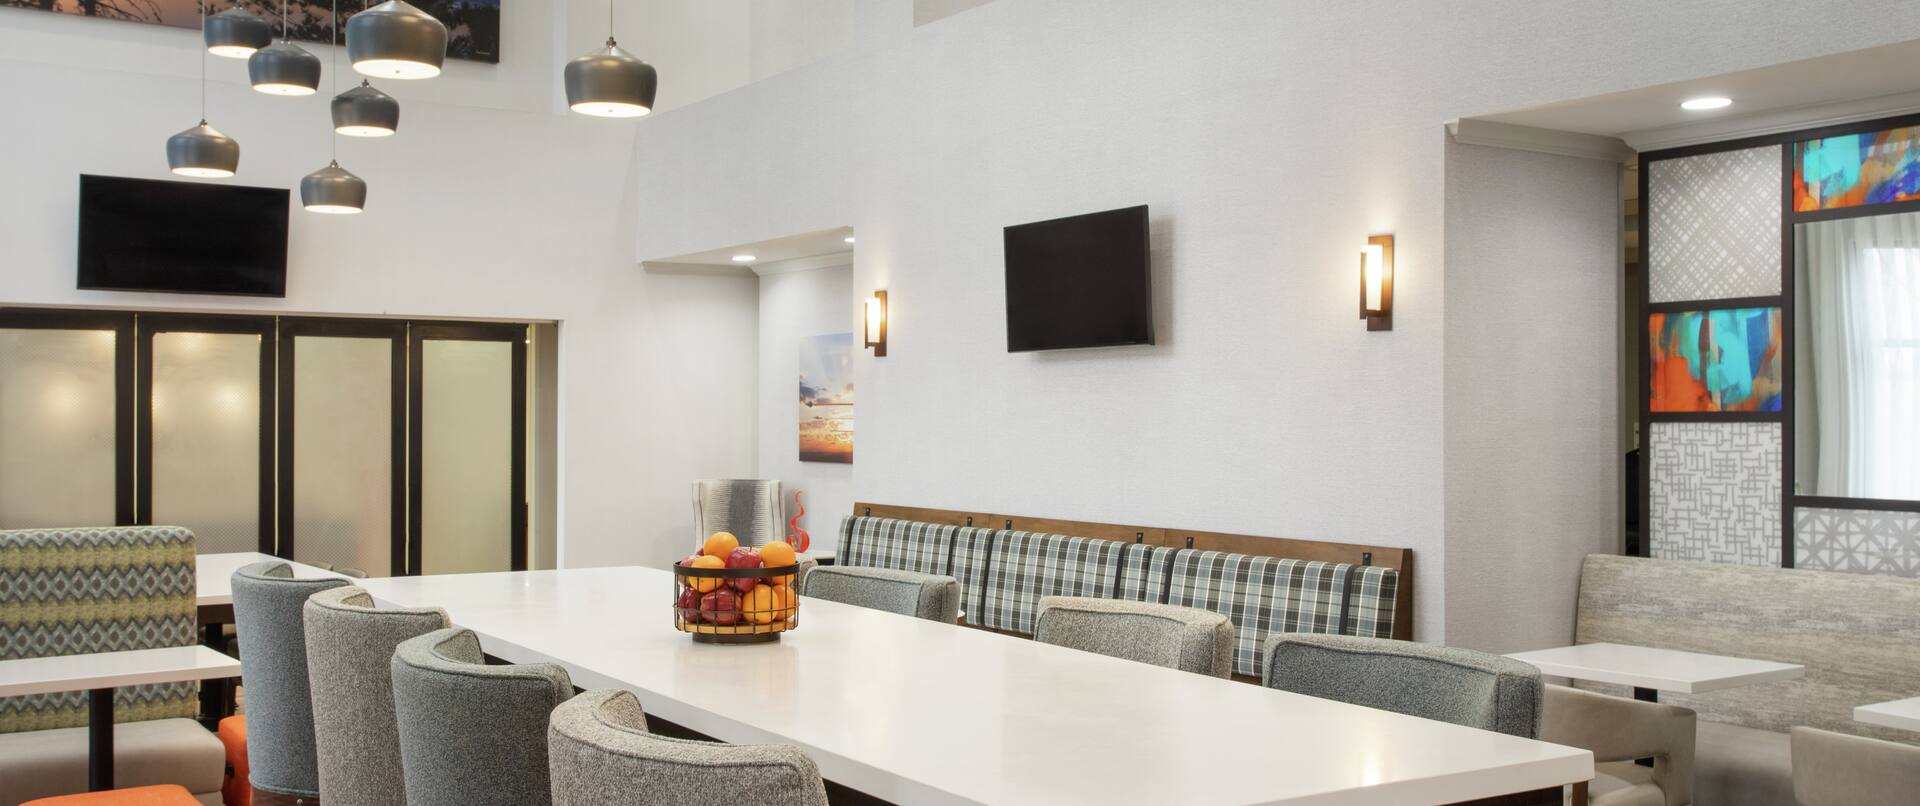 Spacious hotel lobby featuring large communal table, ample soft seating, and stylish design.